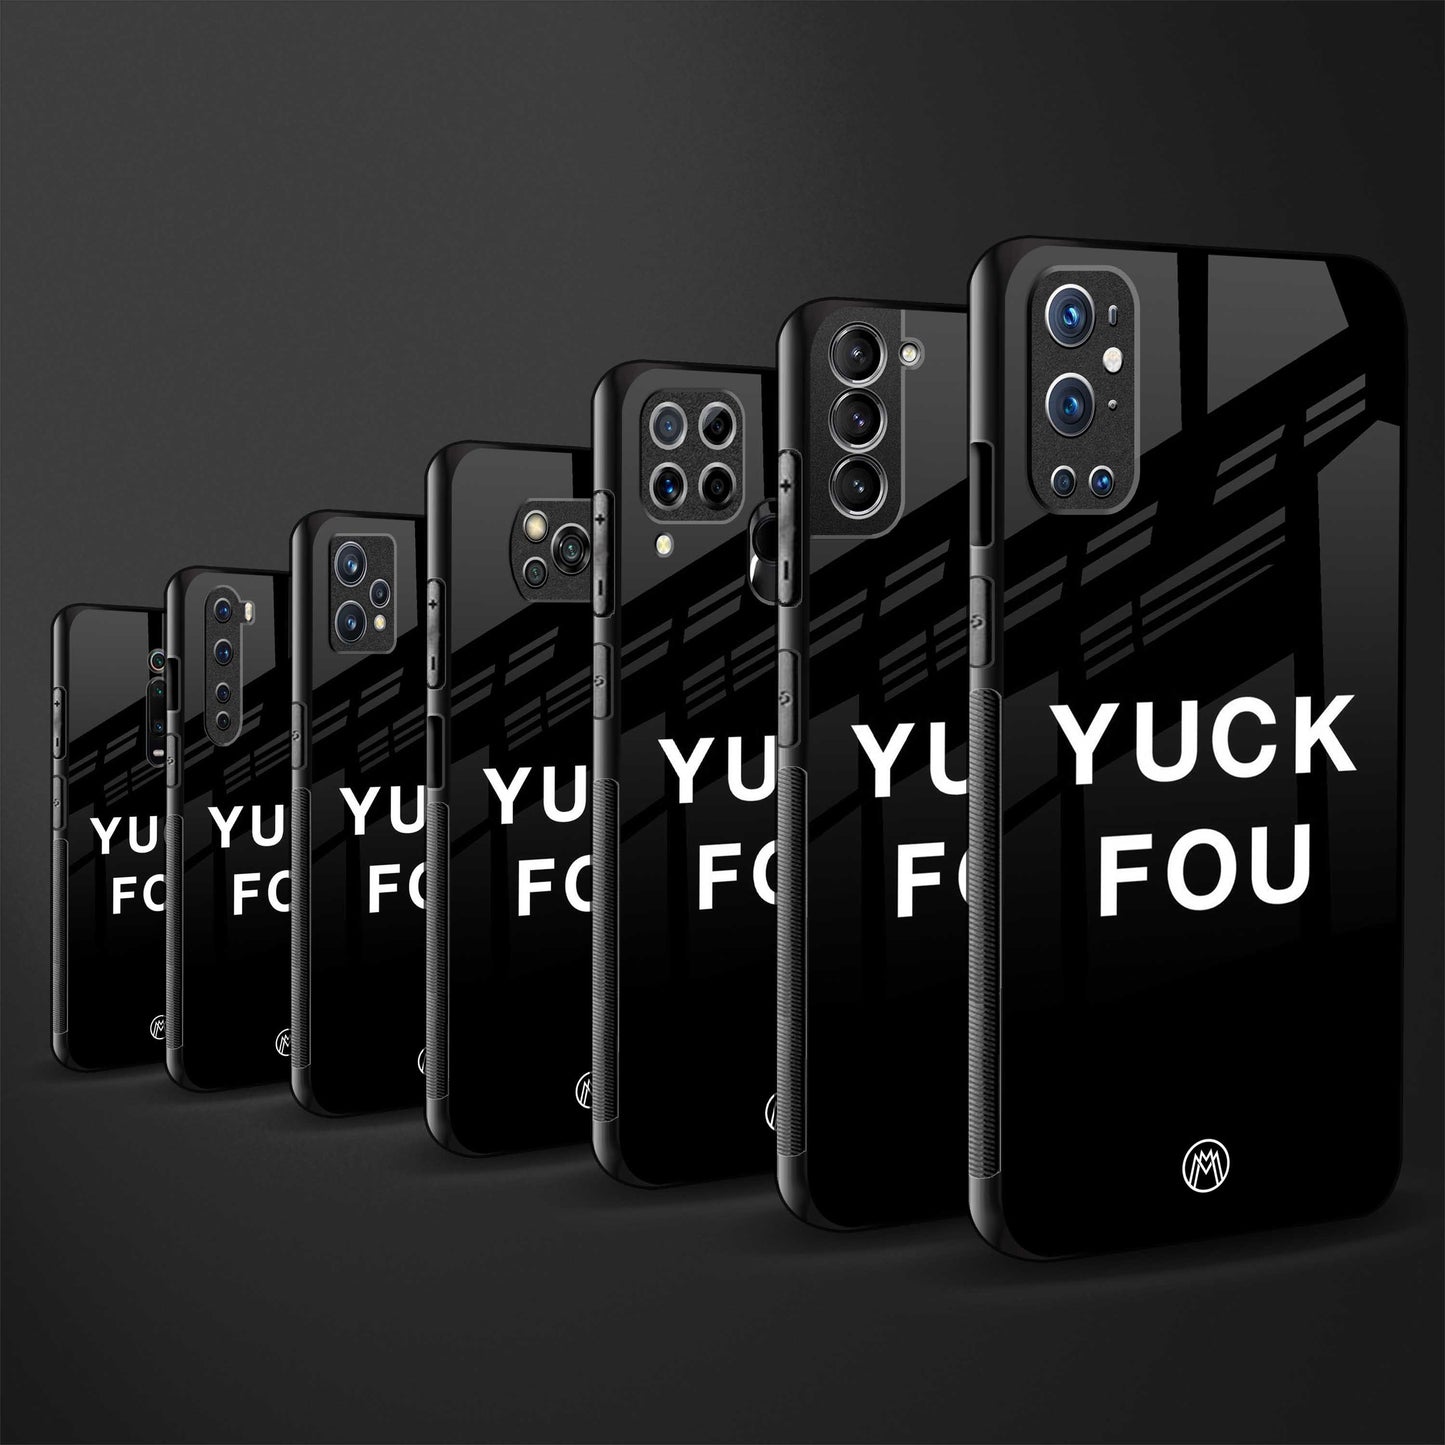 yuck fou glass case for iphone 12 pro max image-3